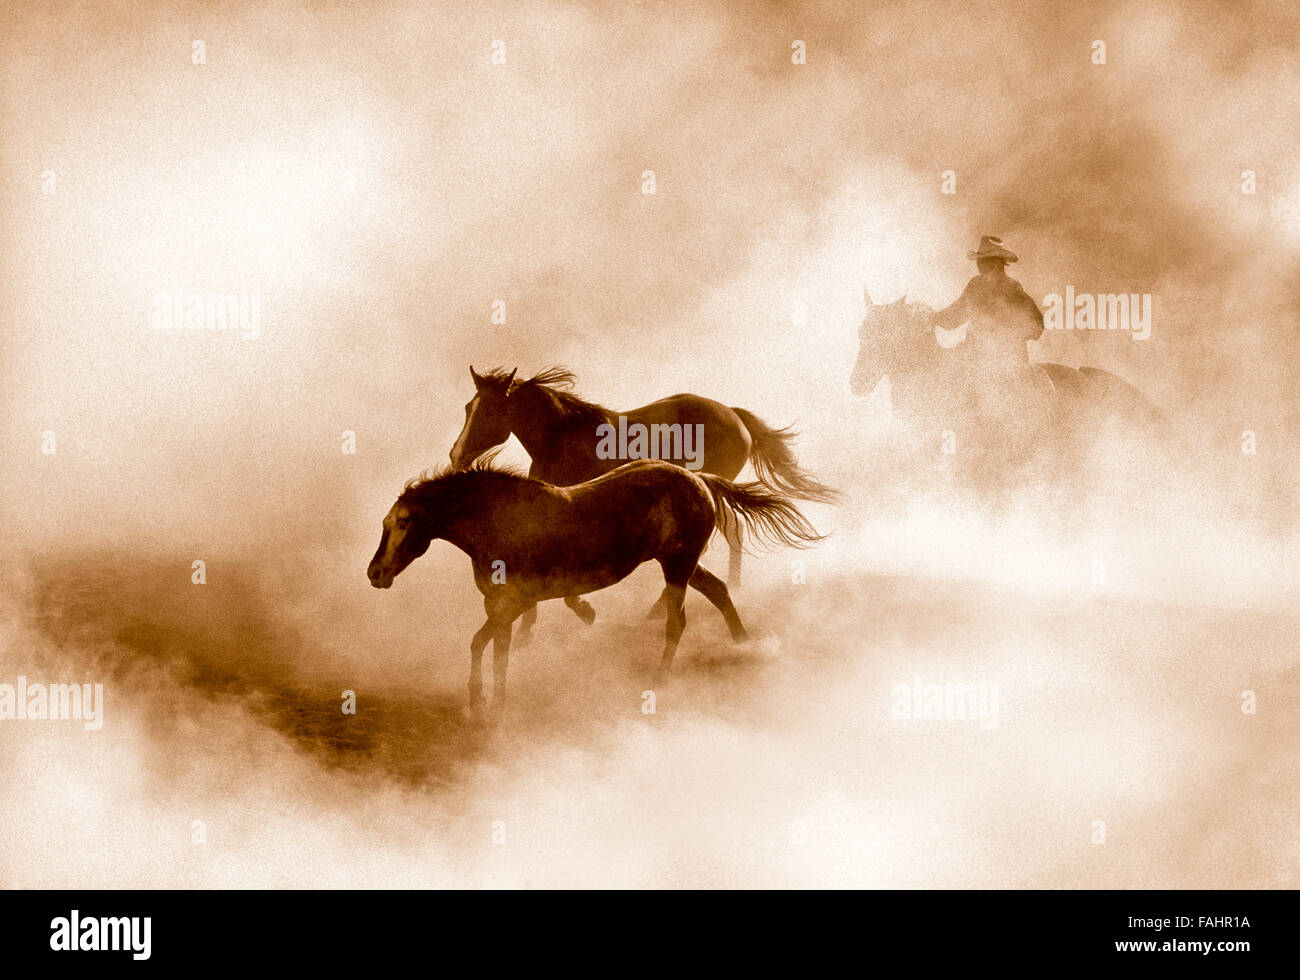 AMERICAN COWBOY, Cowboy rounding up horses in a dusty morning round-up,  Idaho, USA Stock Photo